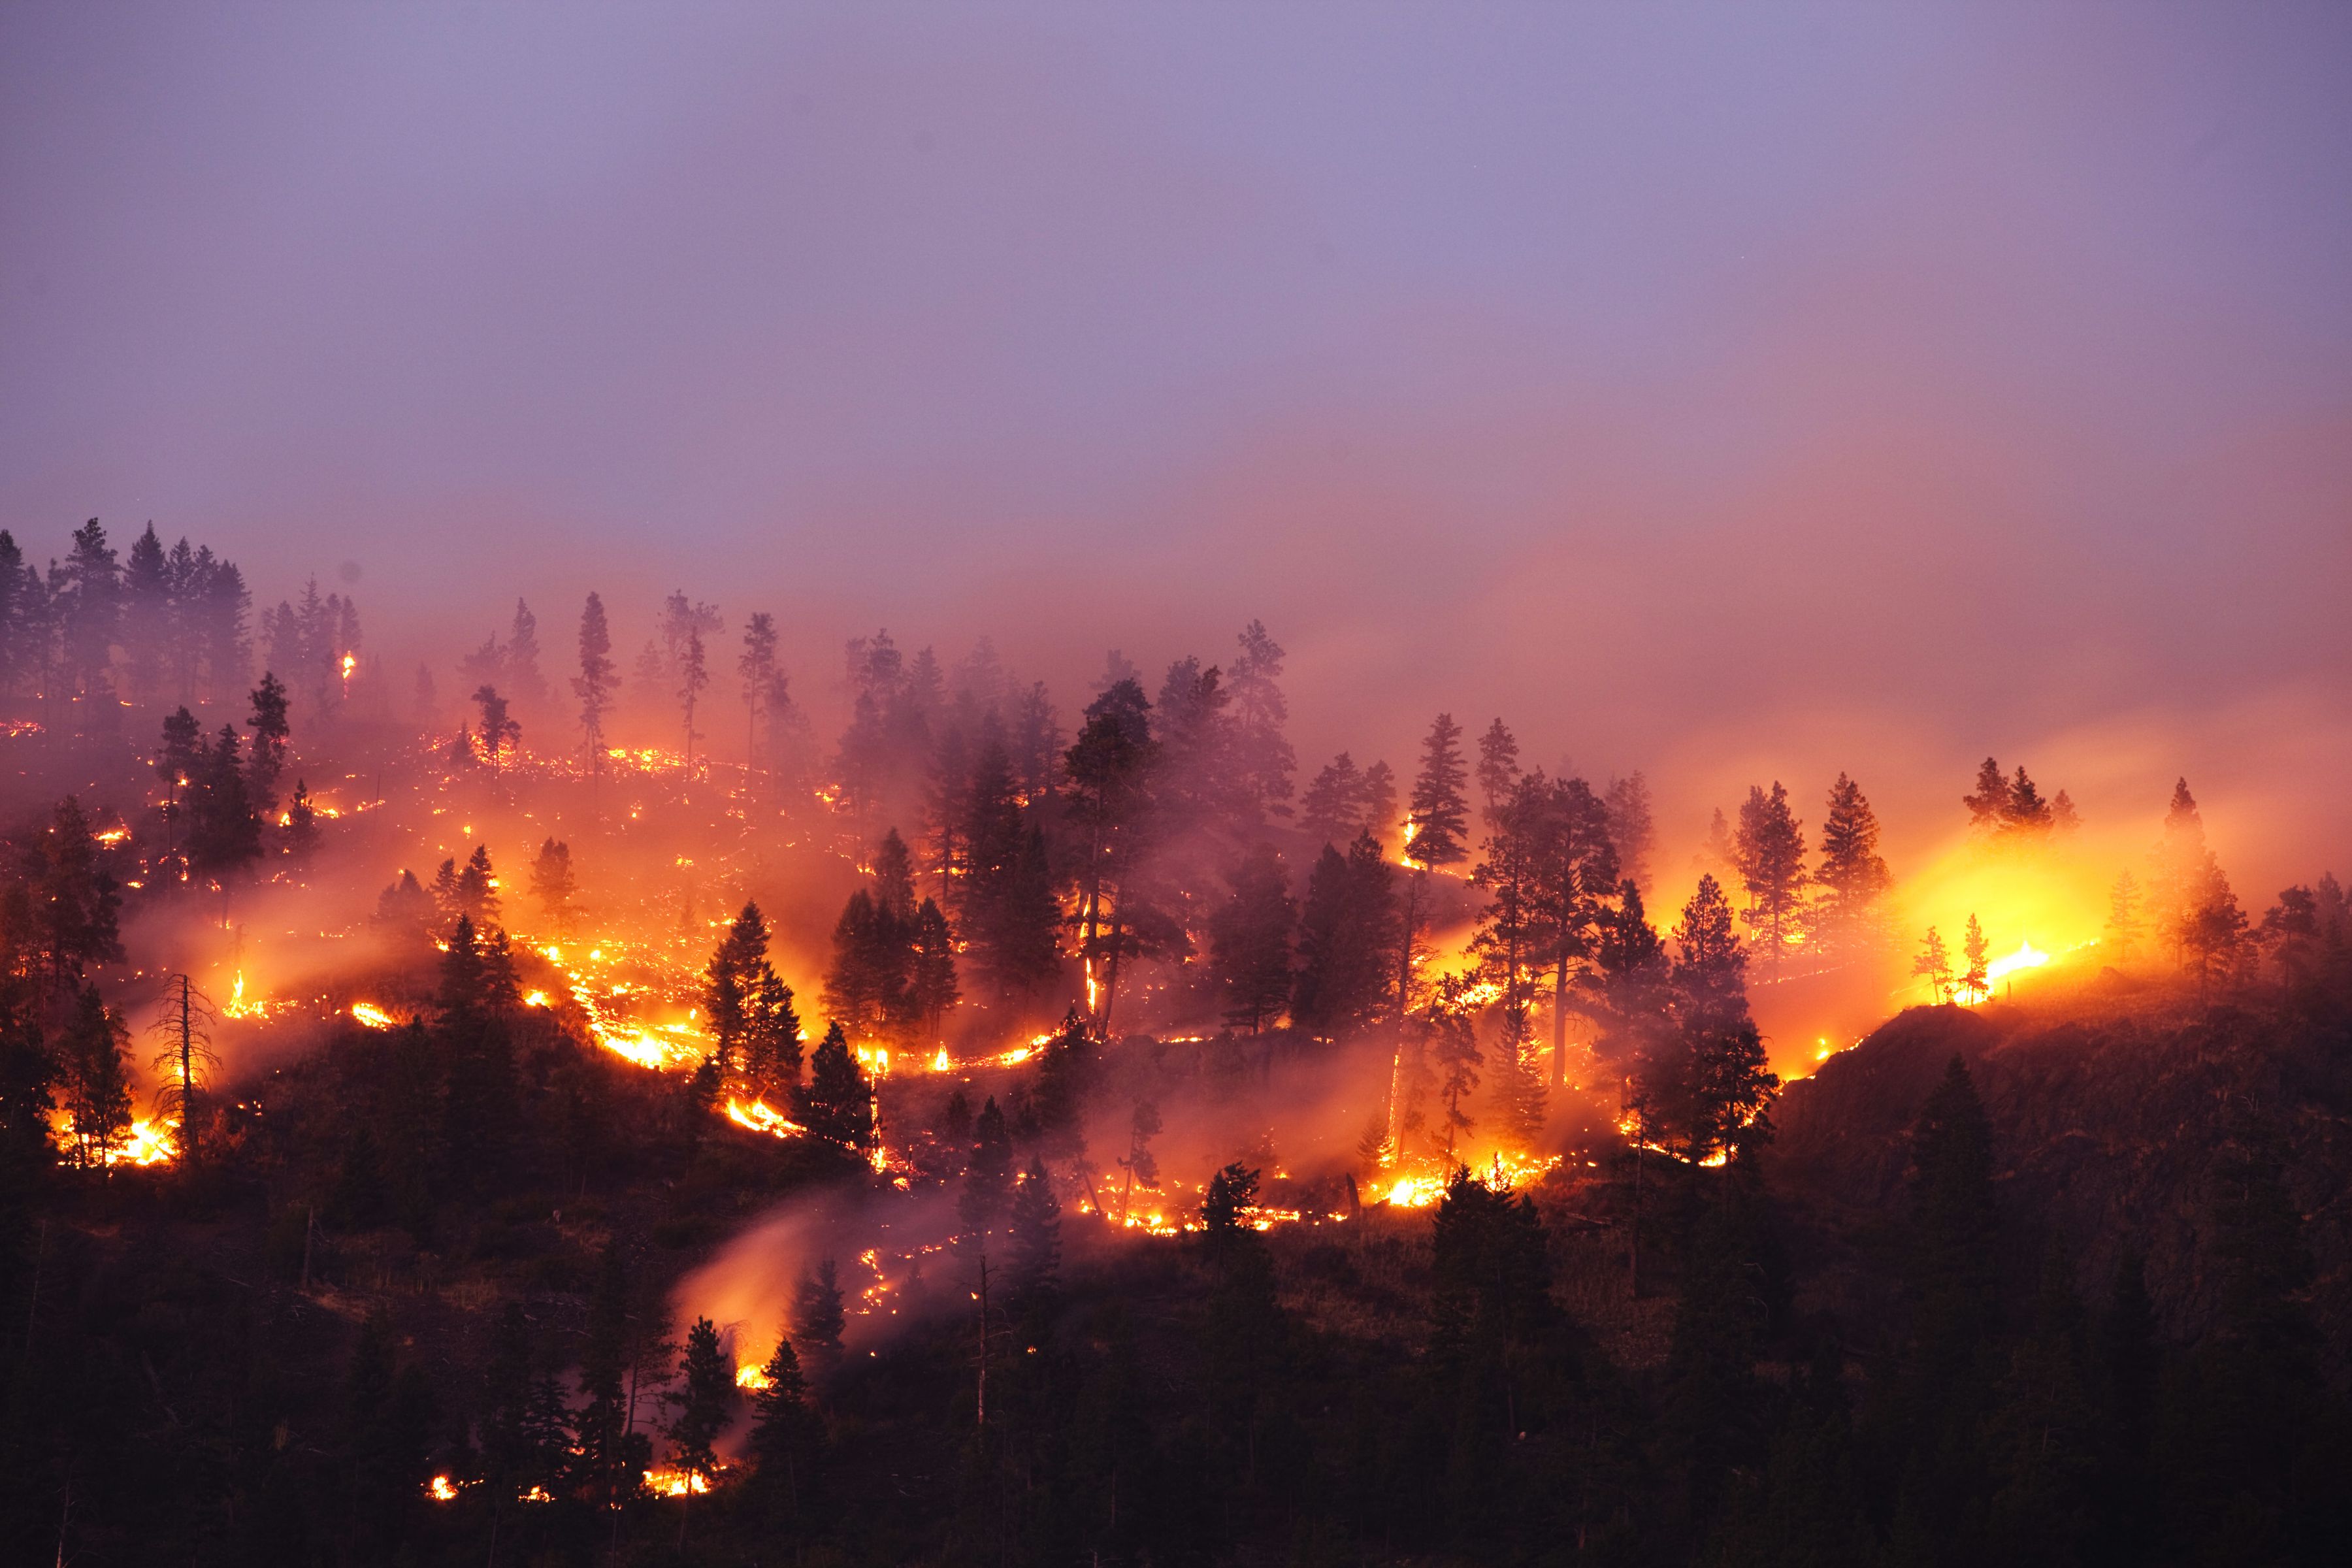 Tips for managing your distress related to wildfires